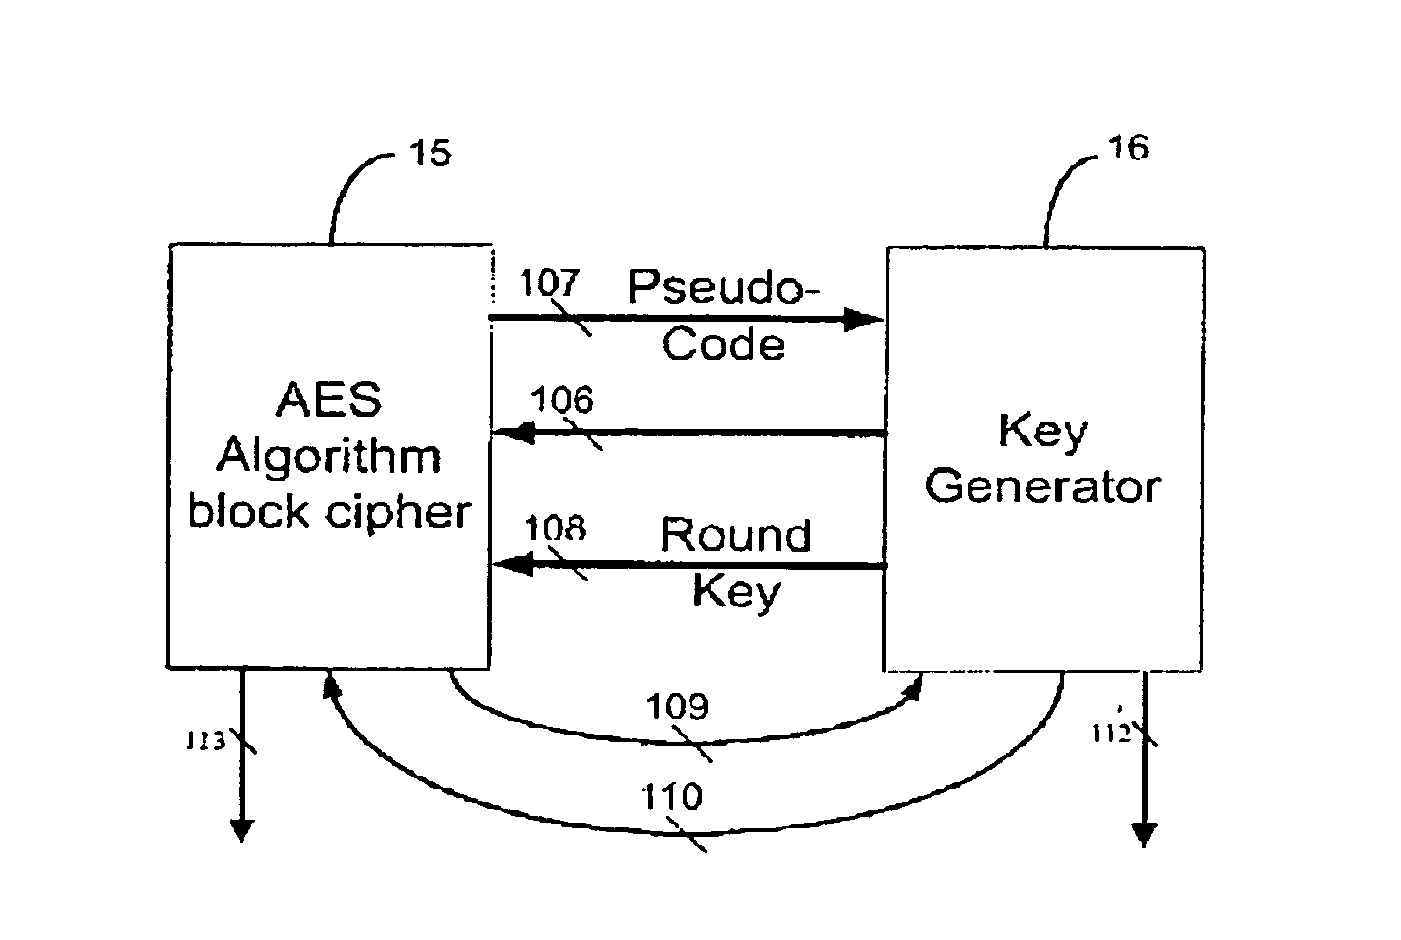 Fast key-changing hardware apparatus for AES block cipher